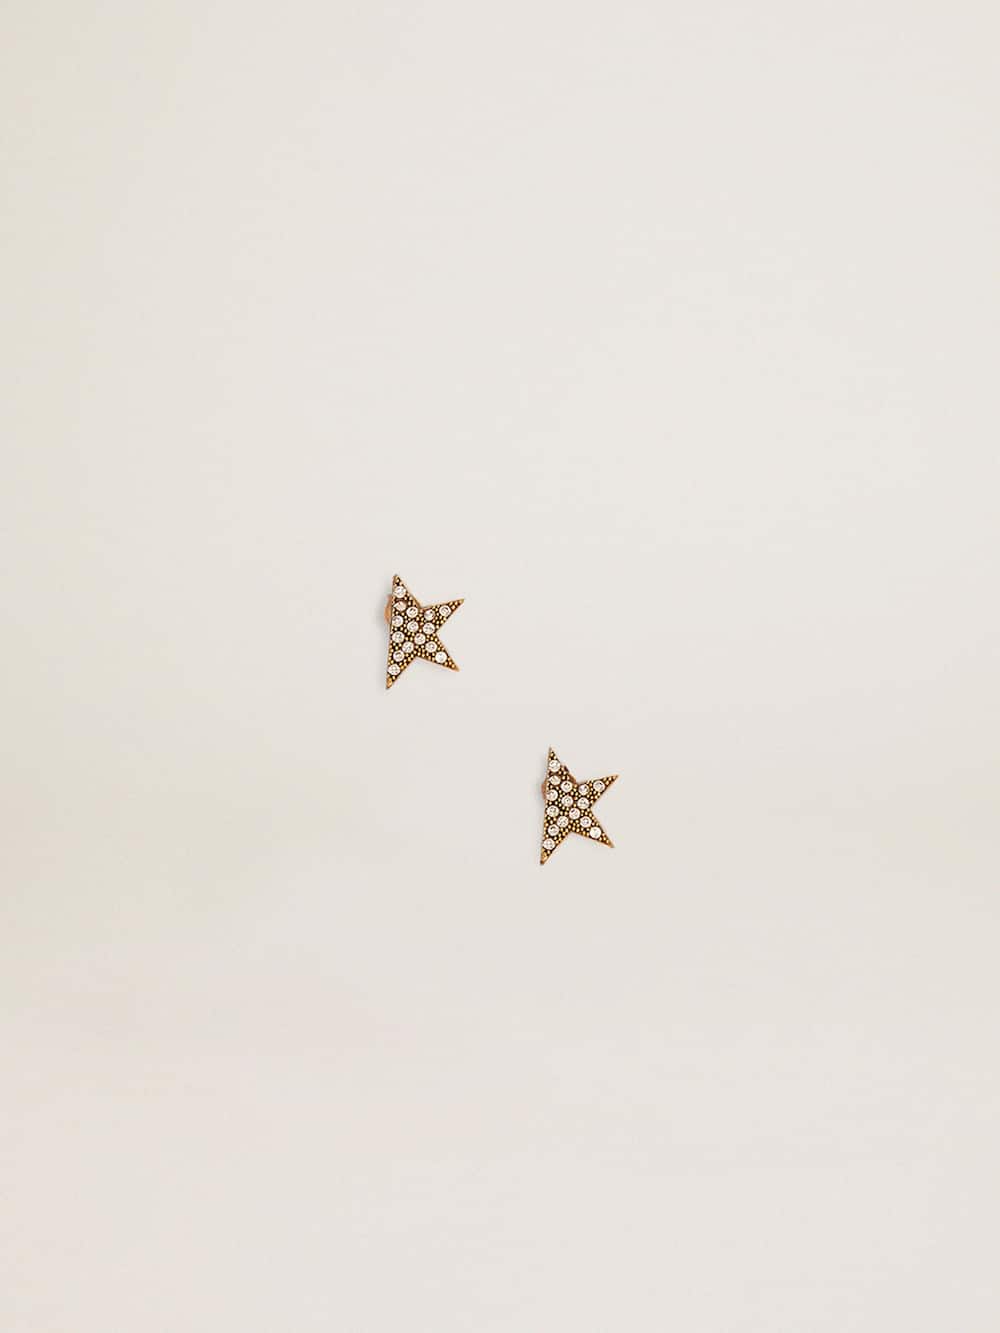 Golden Goose - Women's stud earrings in antique gold color with crystals in 